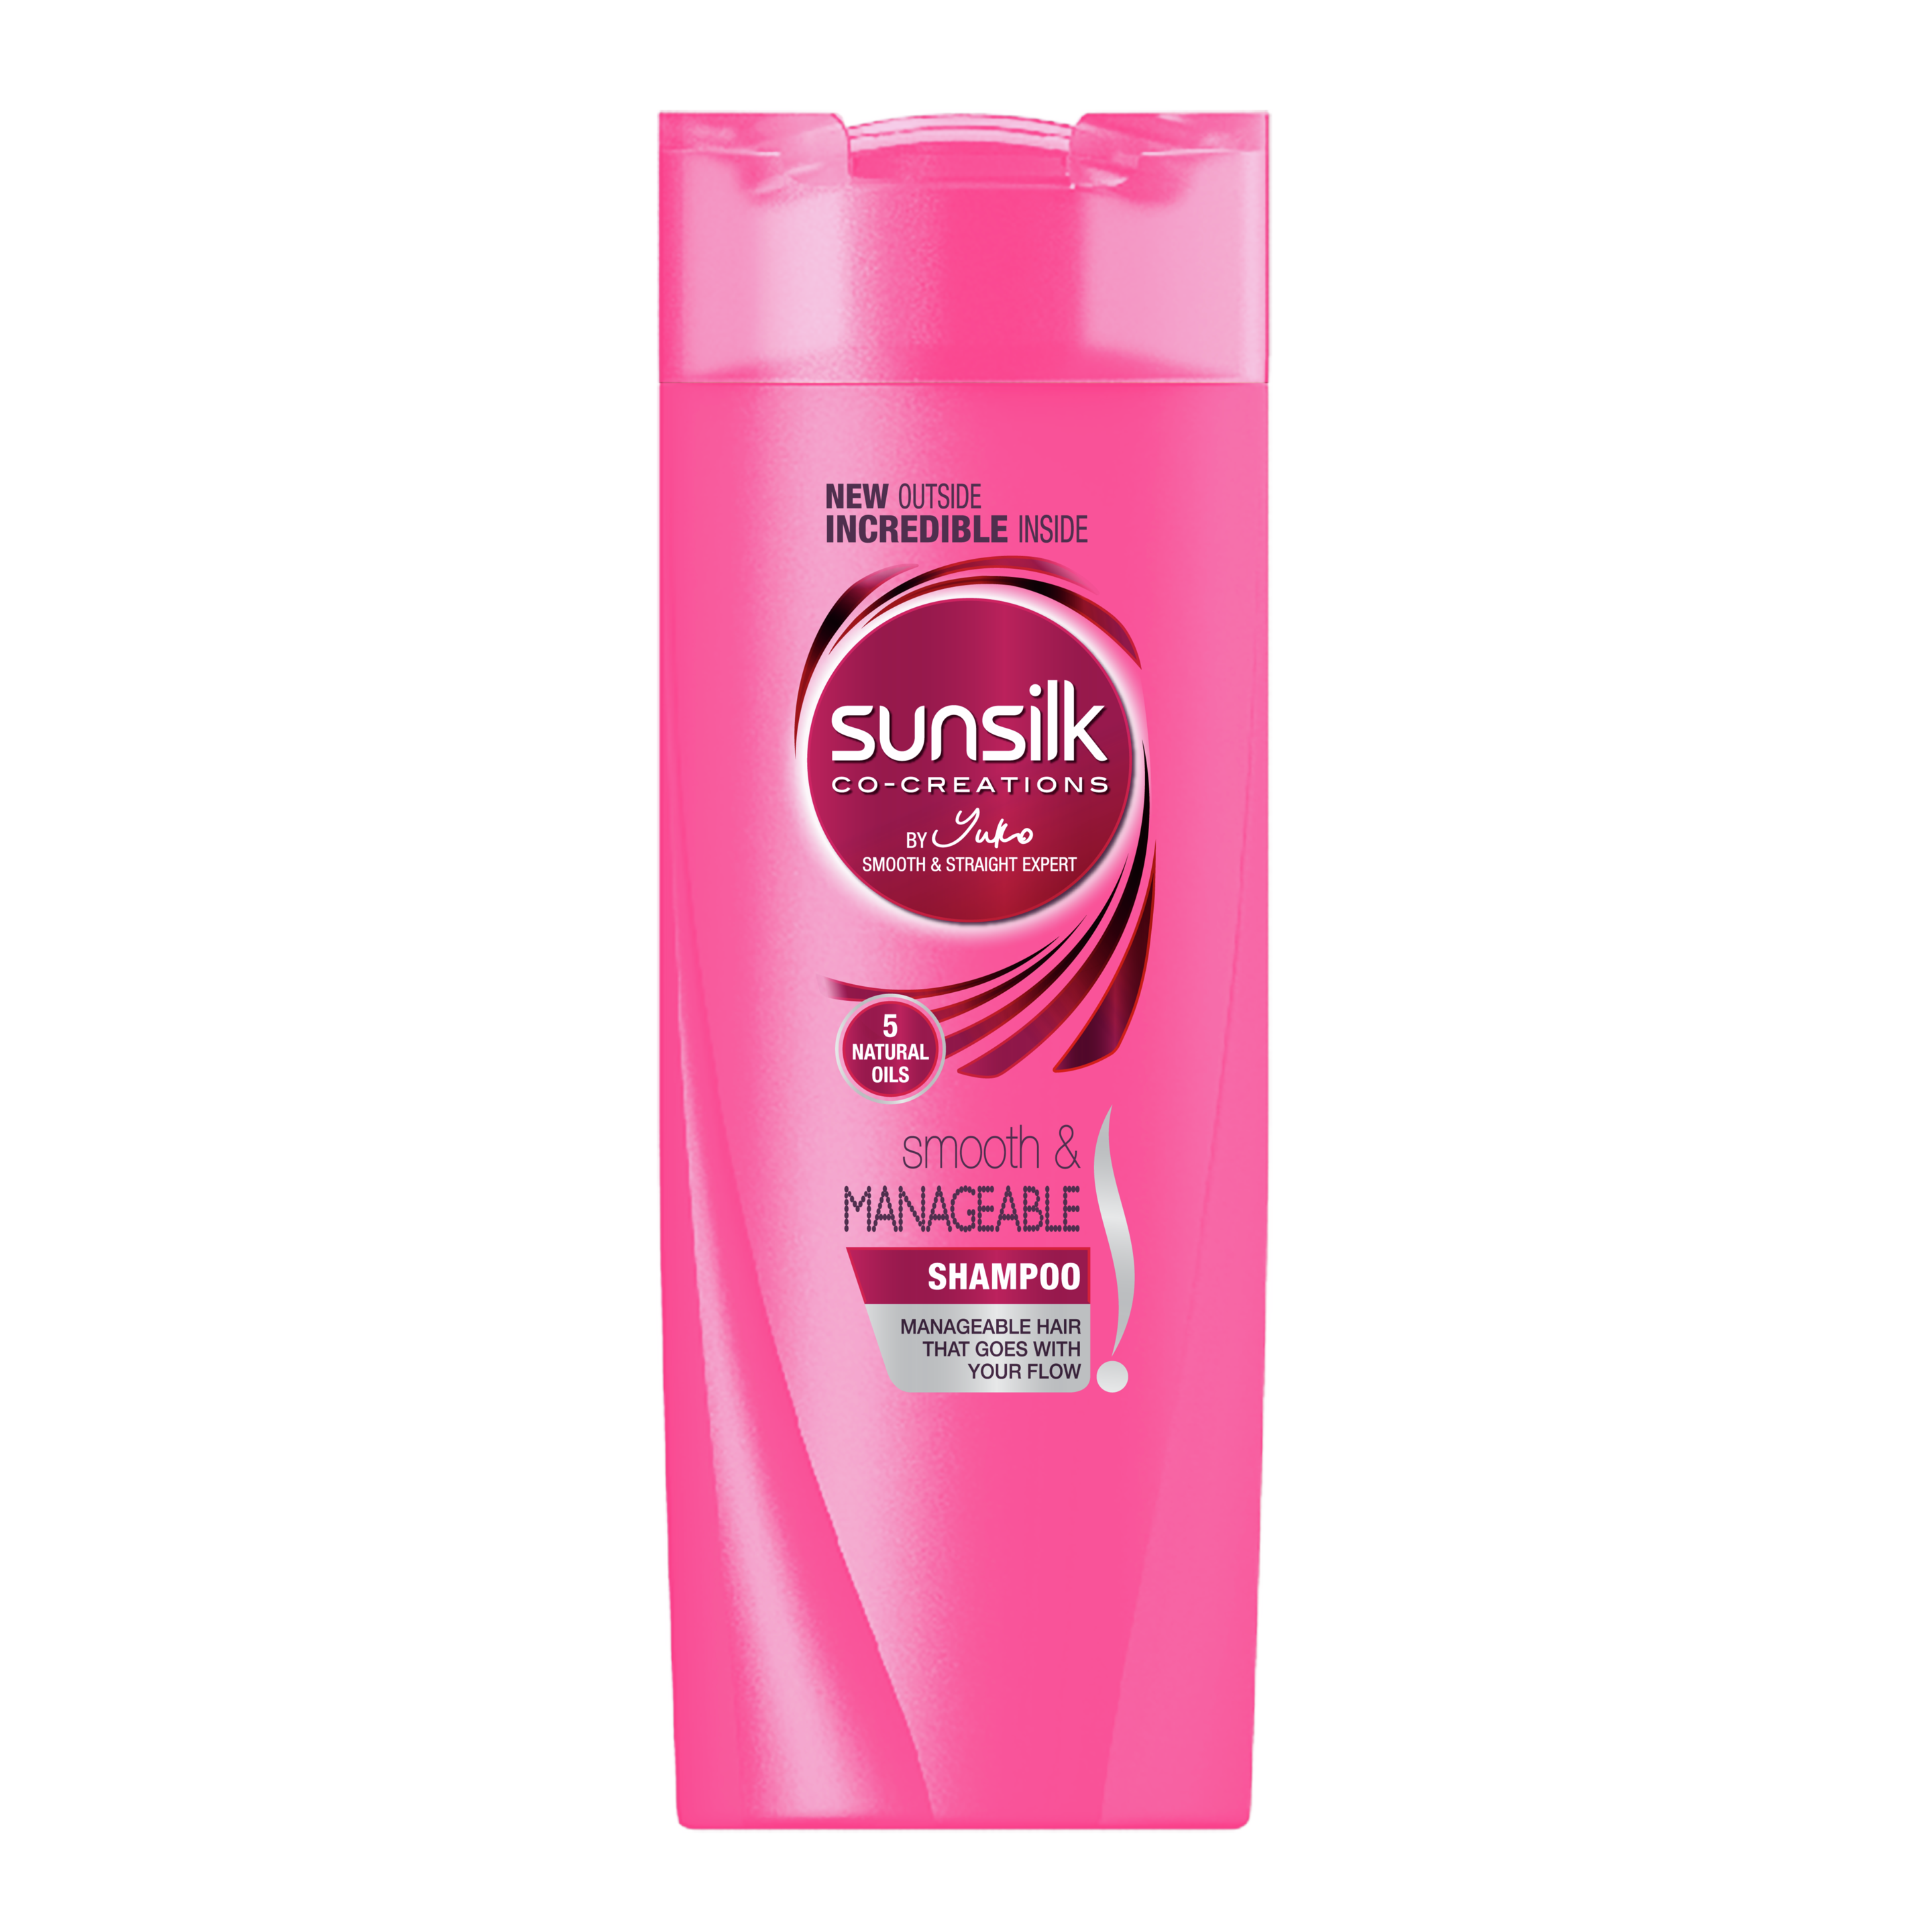 Sunsilk Smooth and Manageable Shampoo 70ml front of pack image